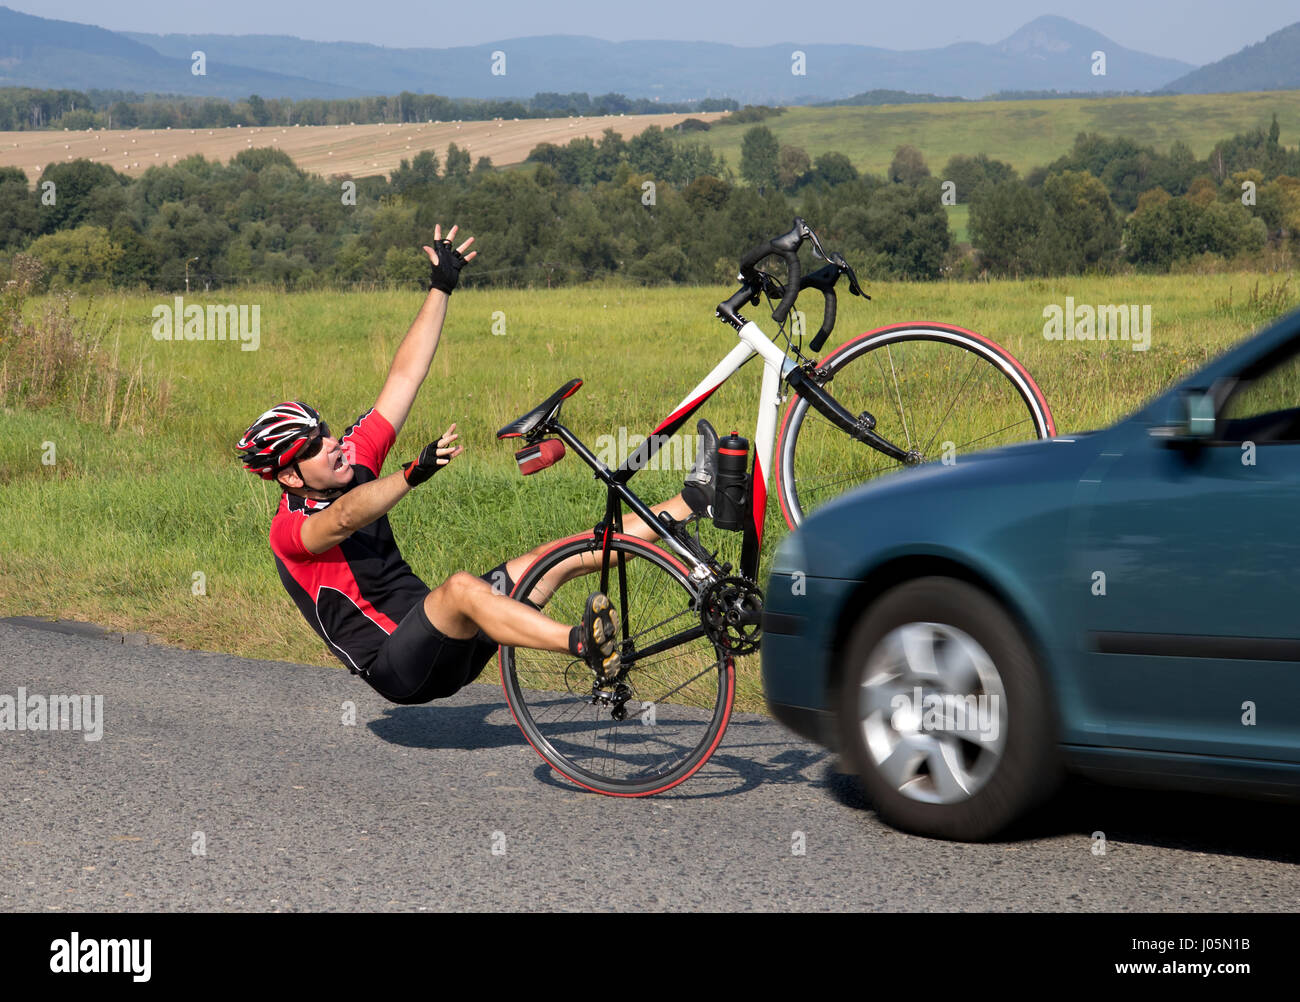 Accident cars with biker. Car collides cyclist on the road. Dangerous traffic on asphalt way on the countryside. Stock Photo